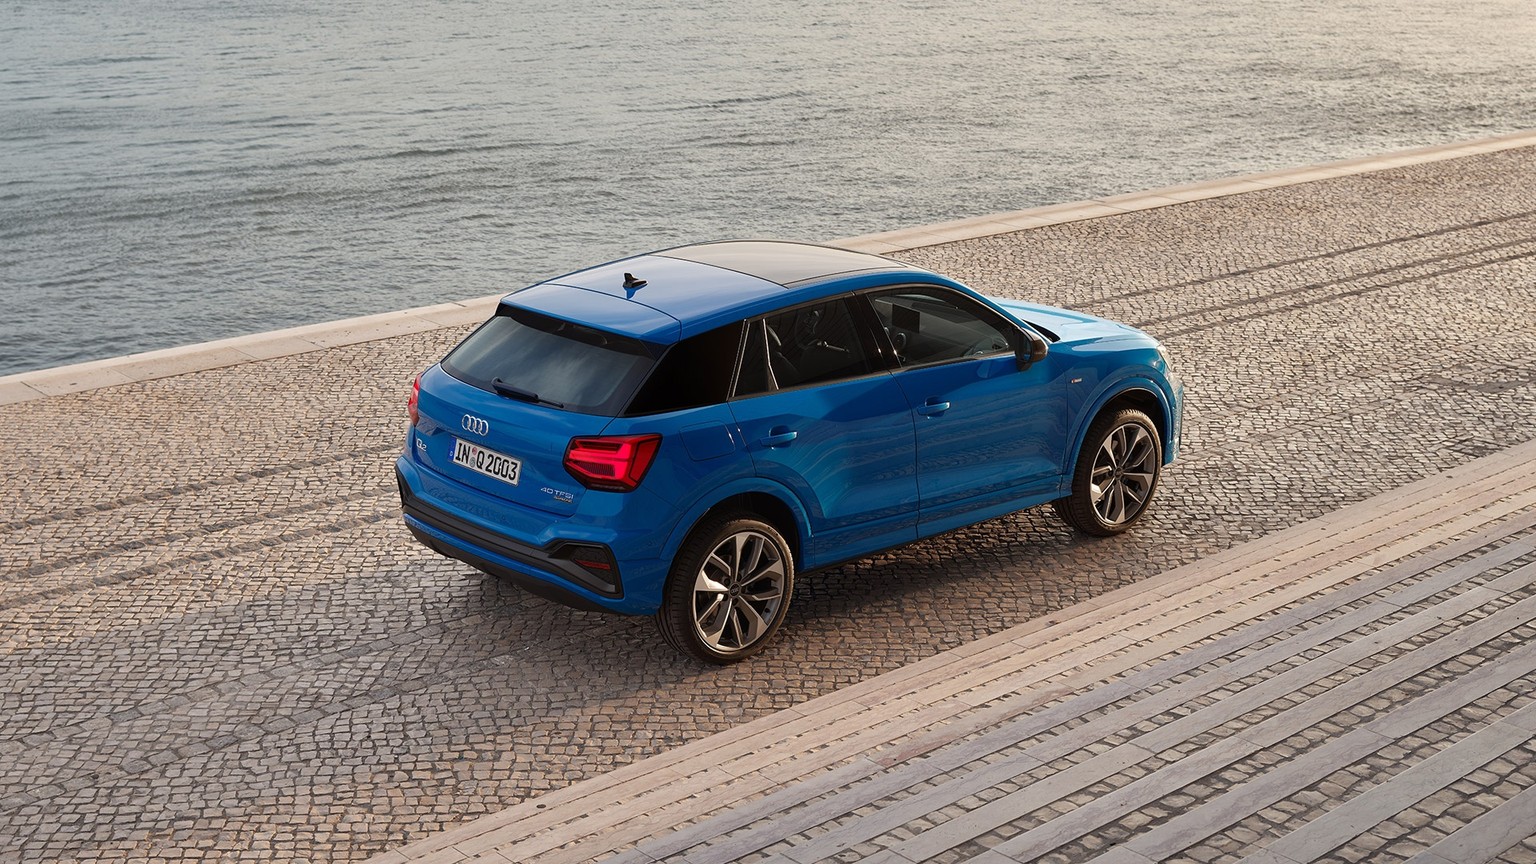 Top-side view of the Audi Q2